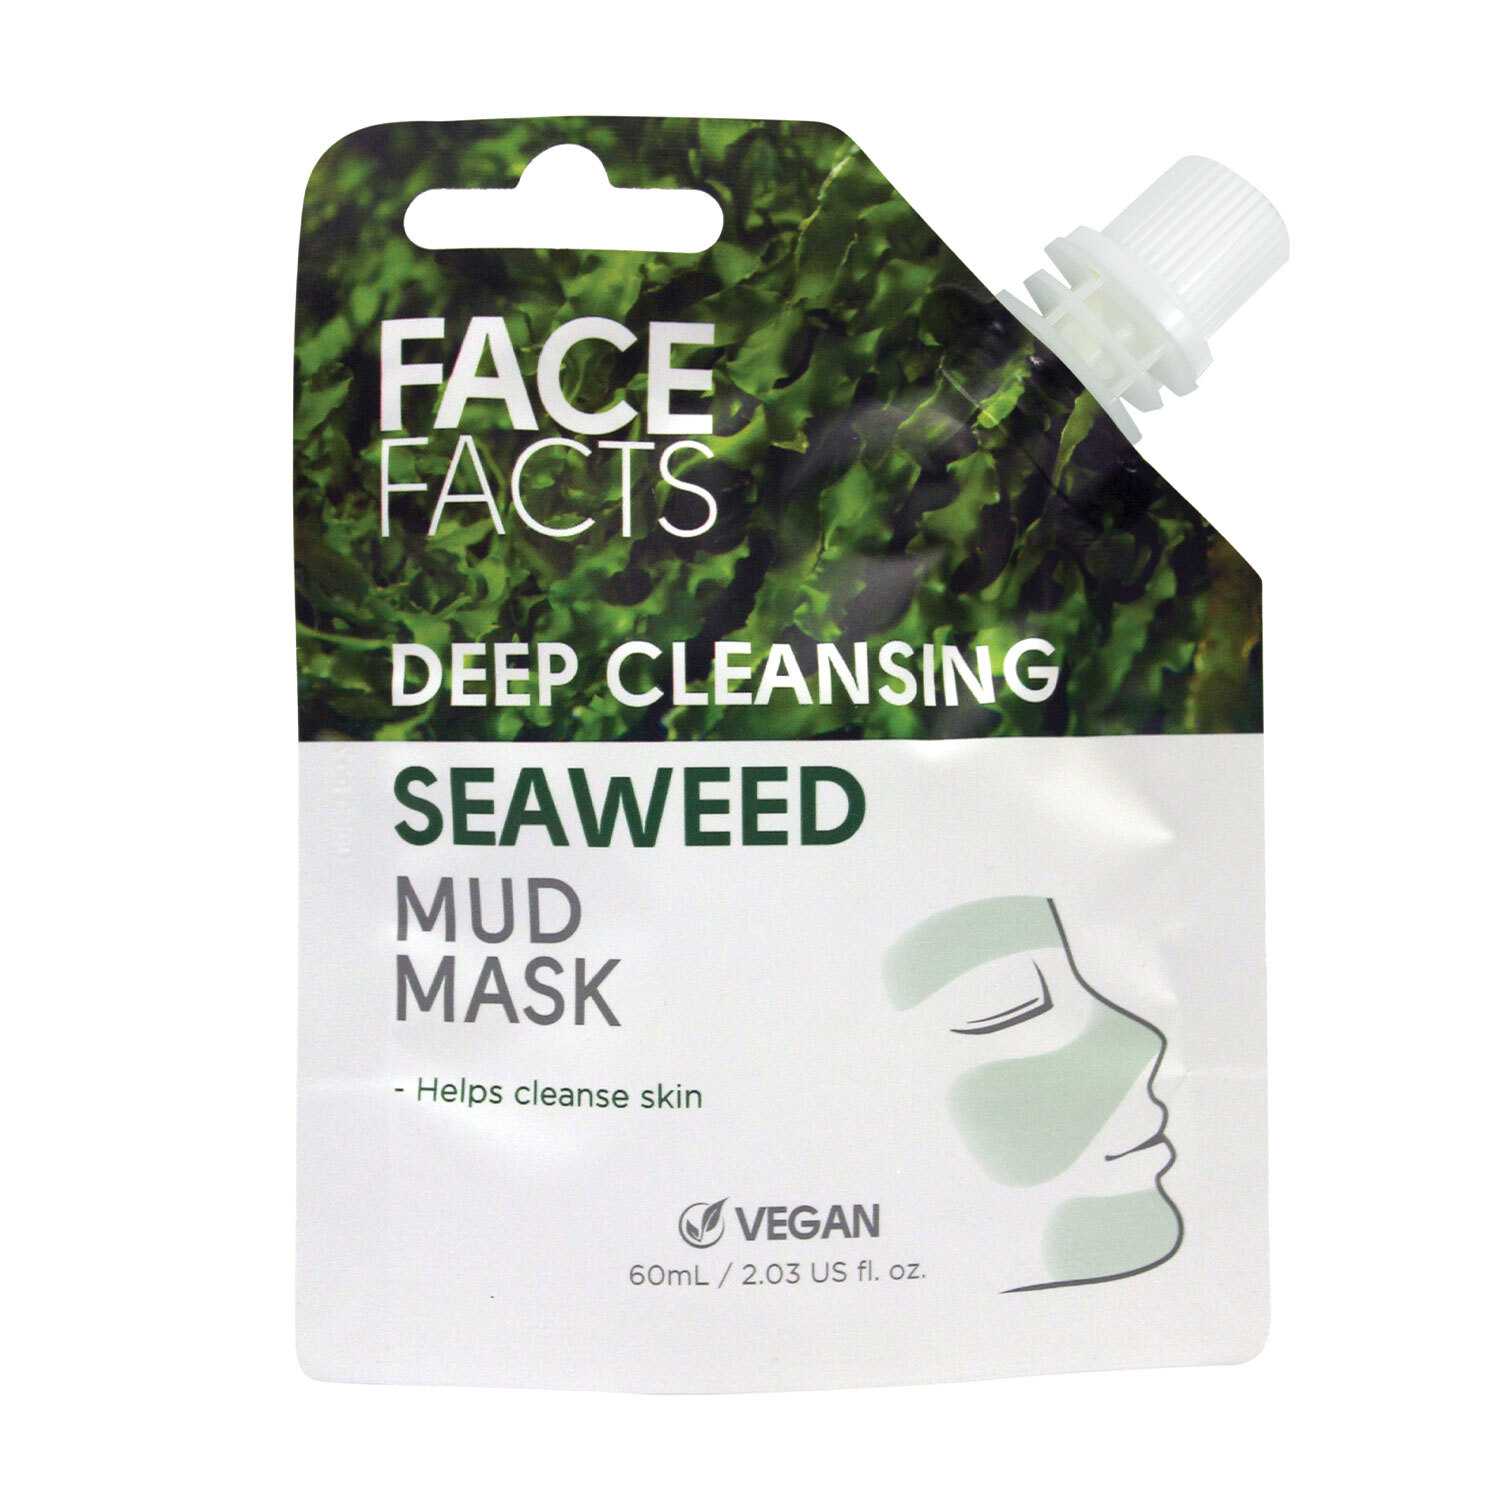 Face Facts Deep Cleansing Seaweed Mud Mask Image